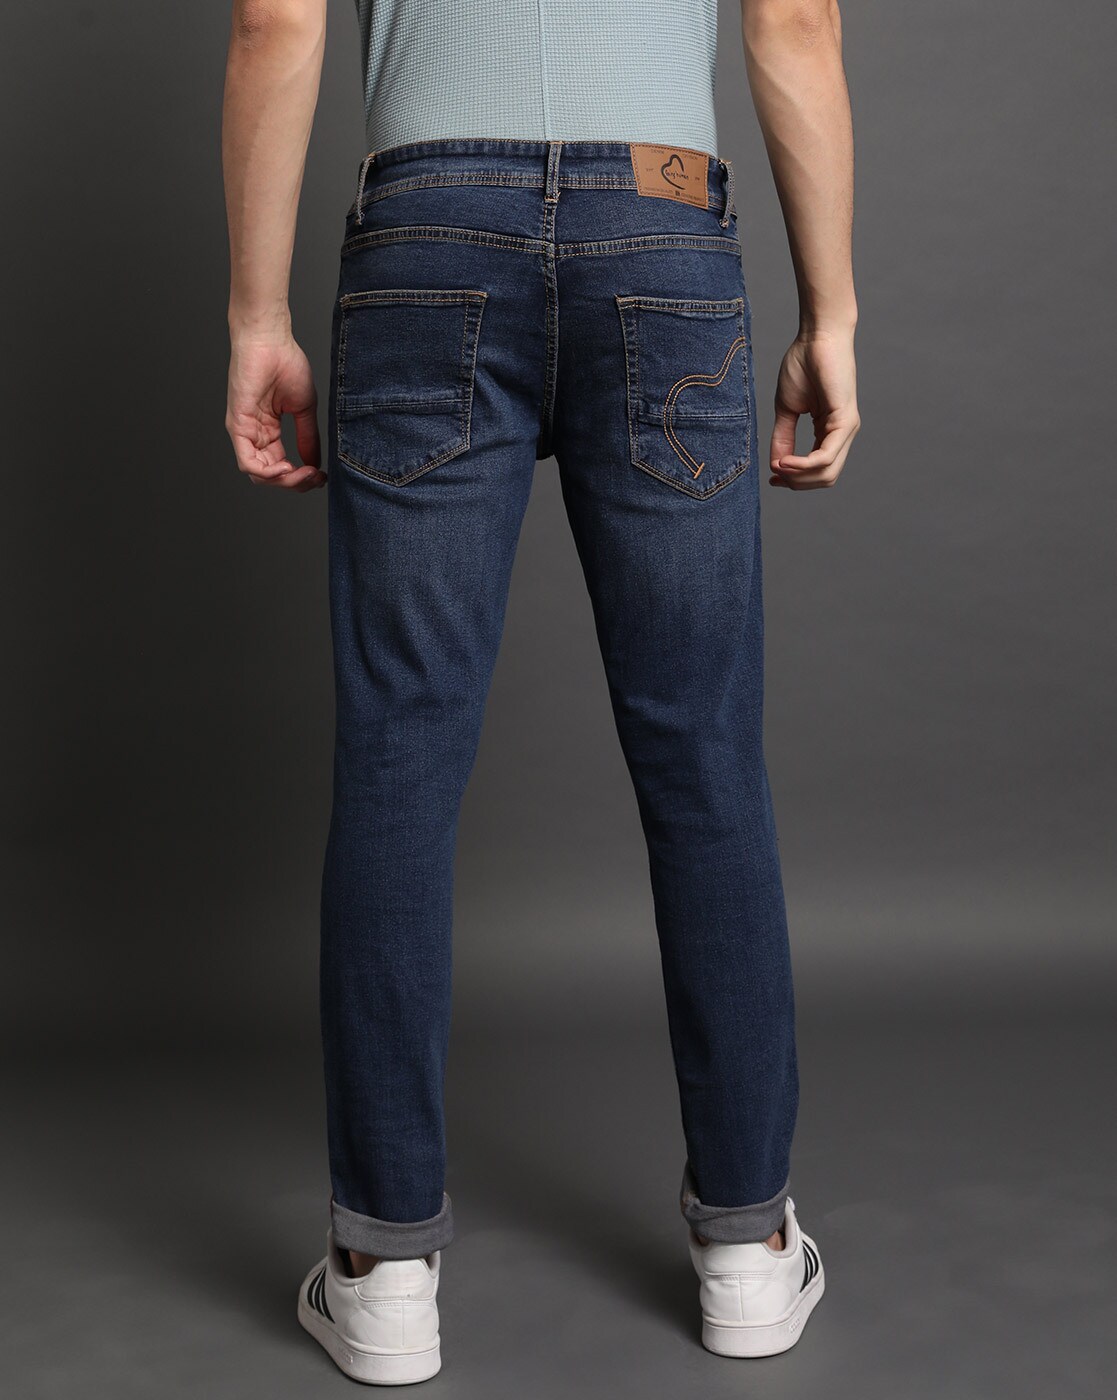 UTH by Roadster Jogger Fit Boys Blue Jeans - Buy UTH by Roadster Jogger Fit  Boys Blue Jeans Online at Best Prices in India | Flipkart.com